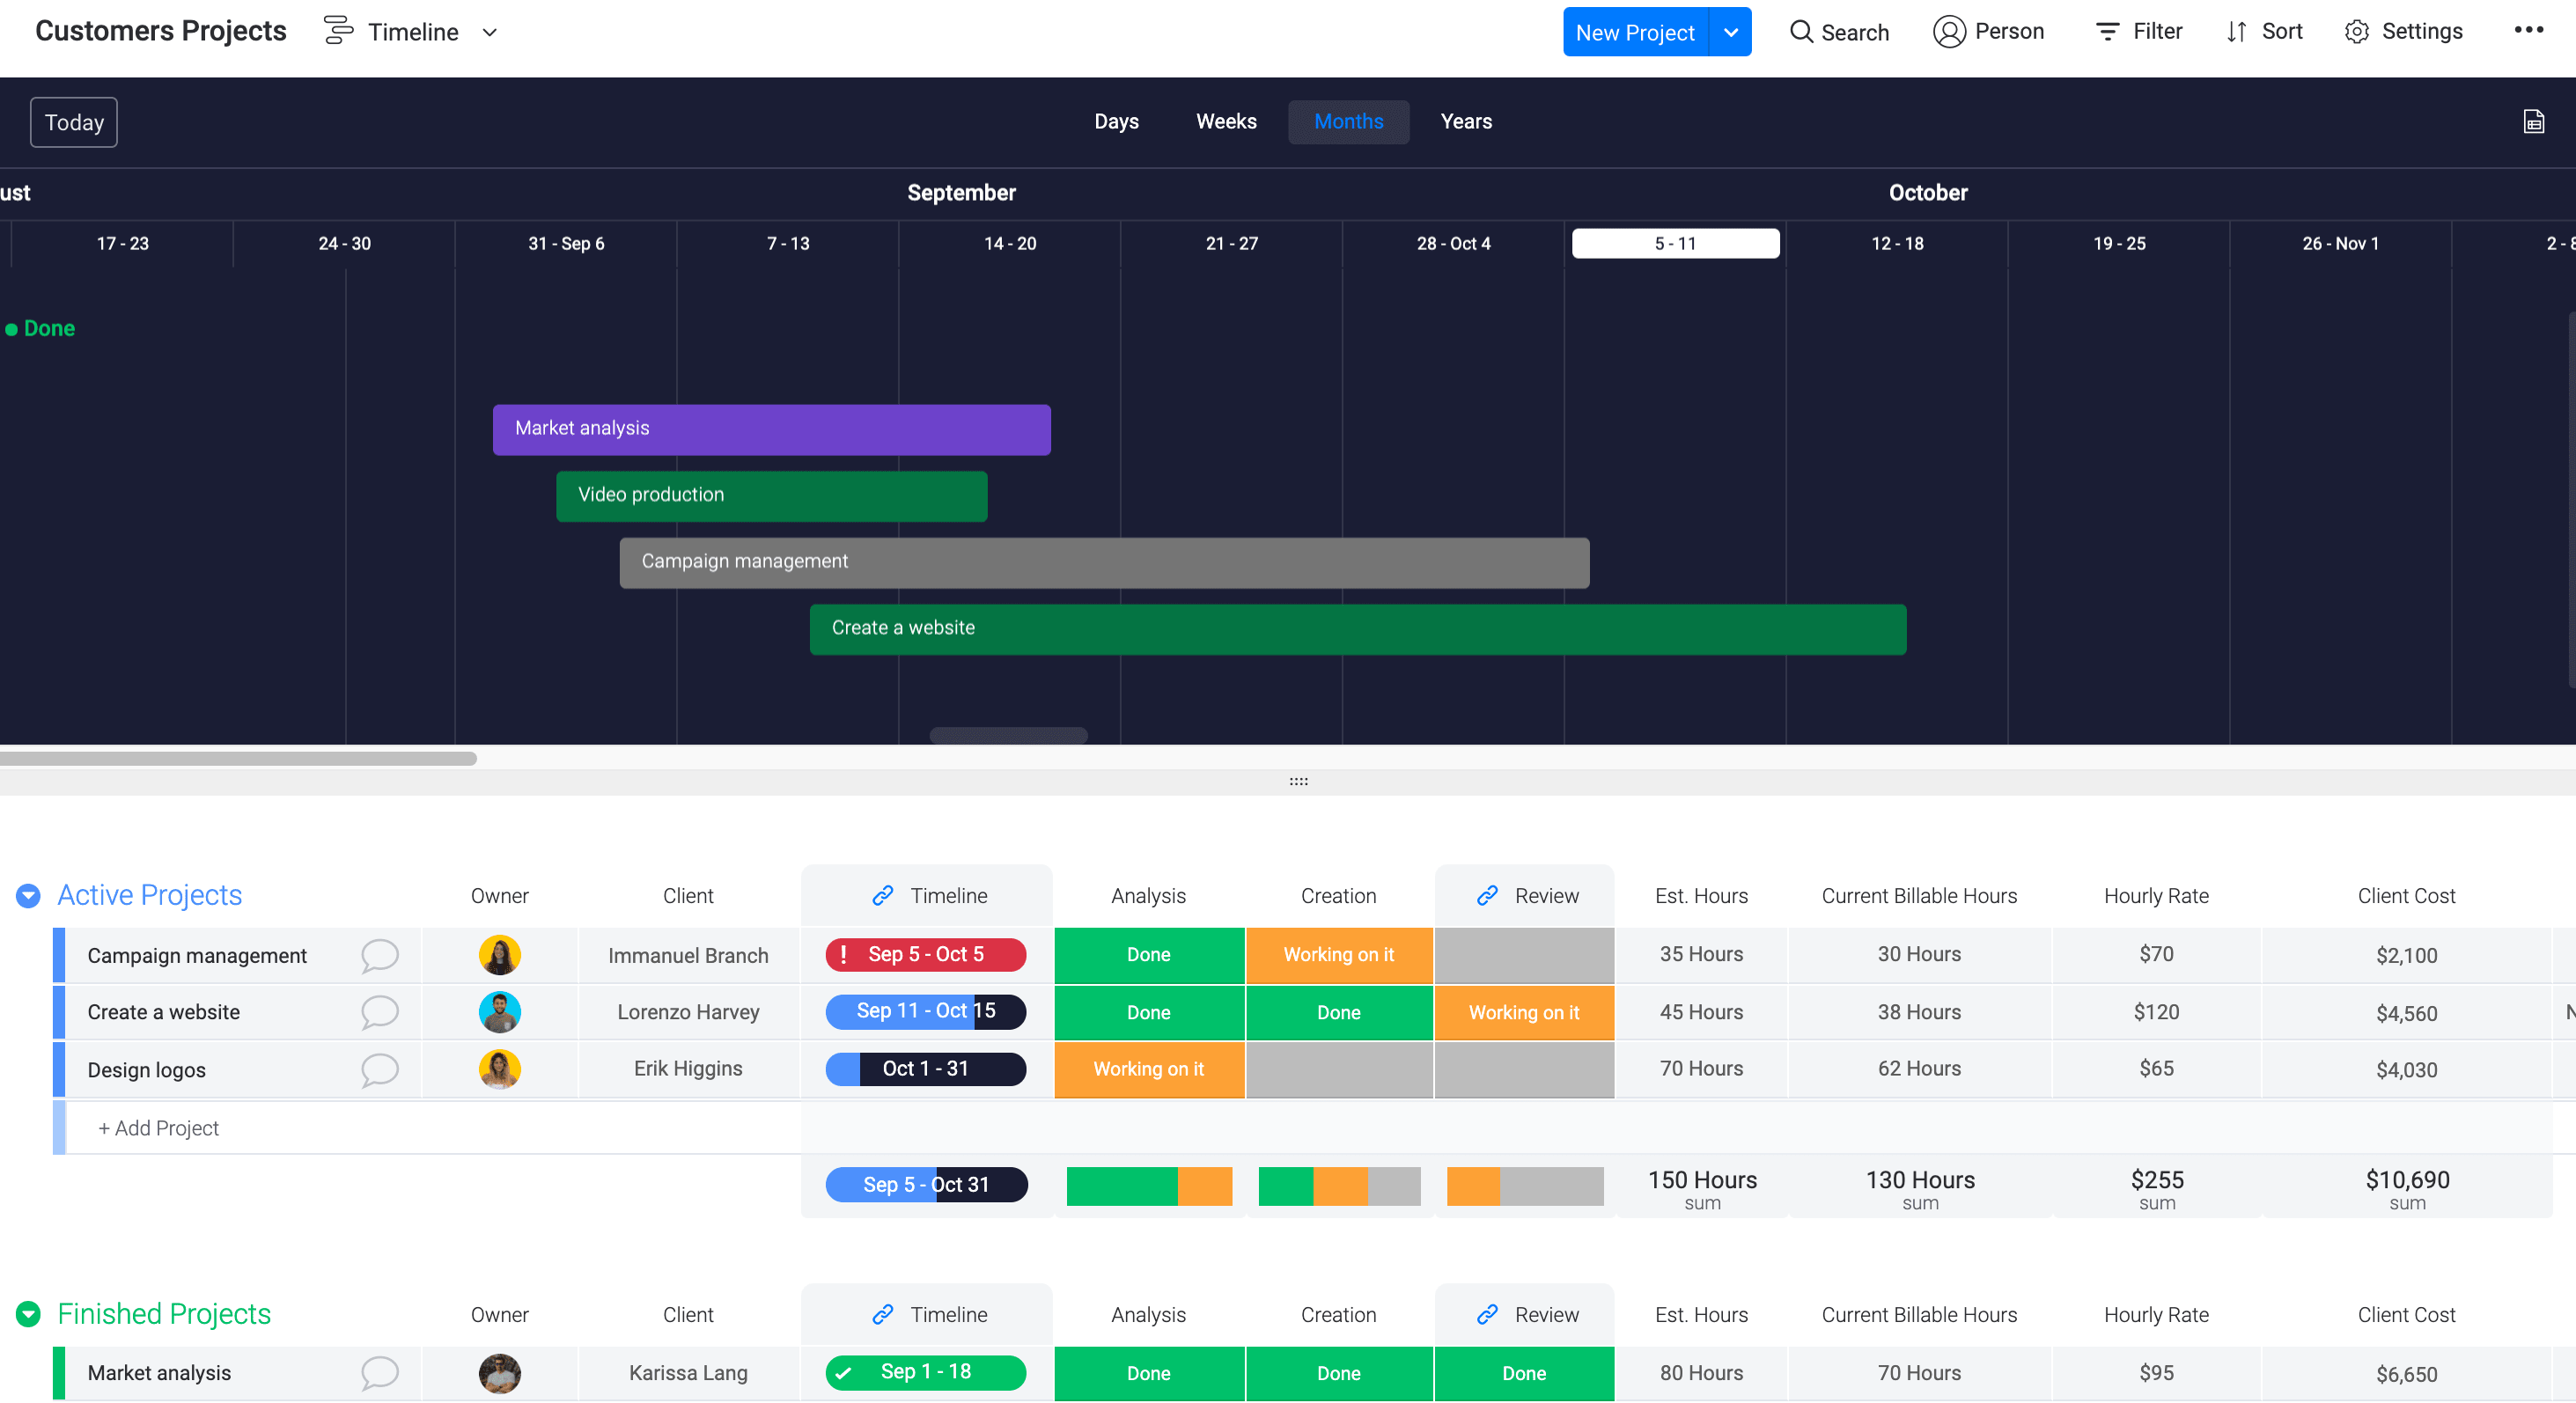 Get an overview of your projects timelines